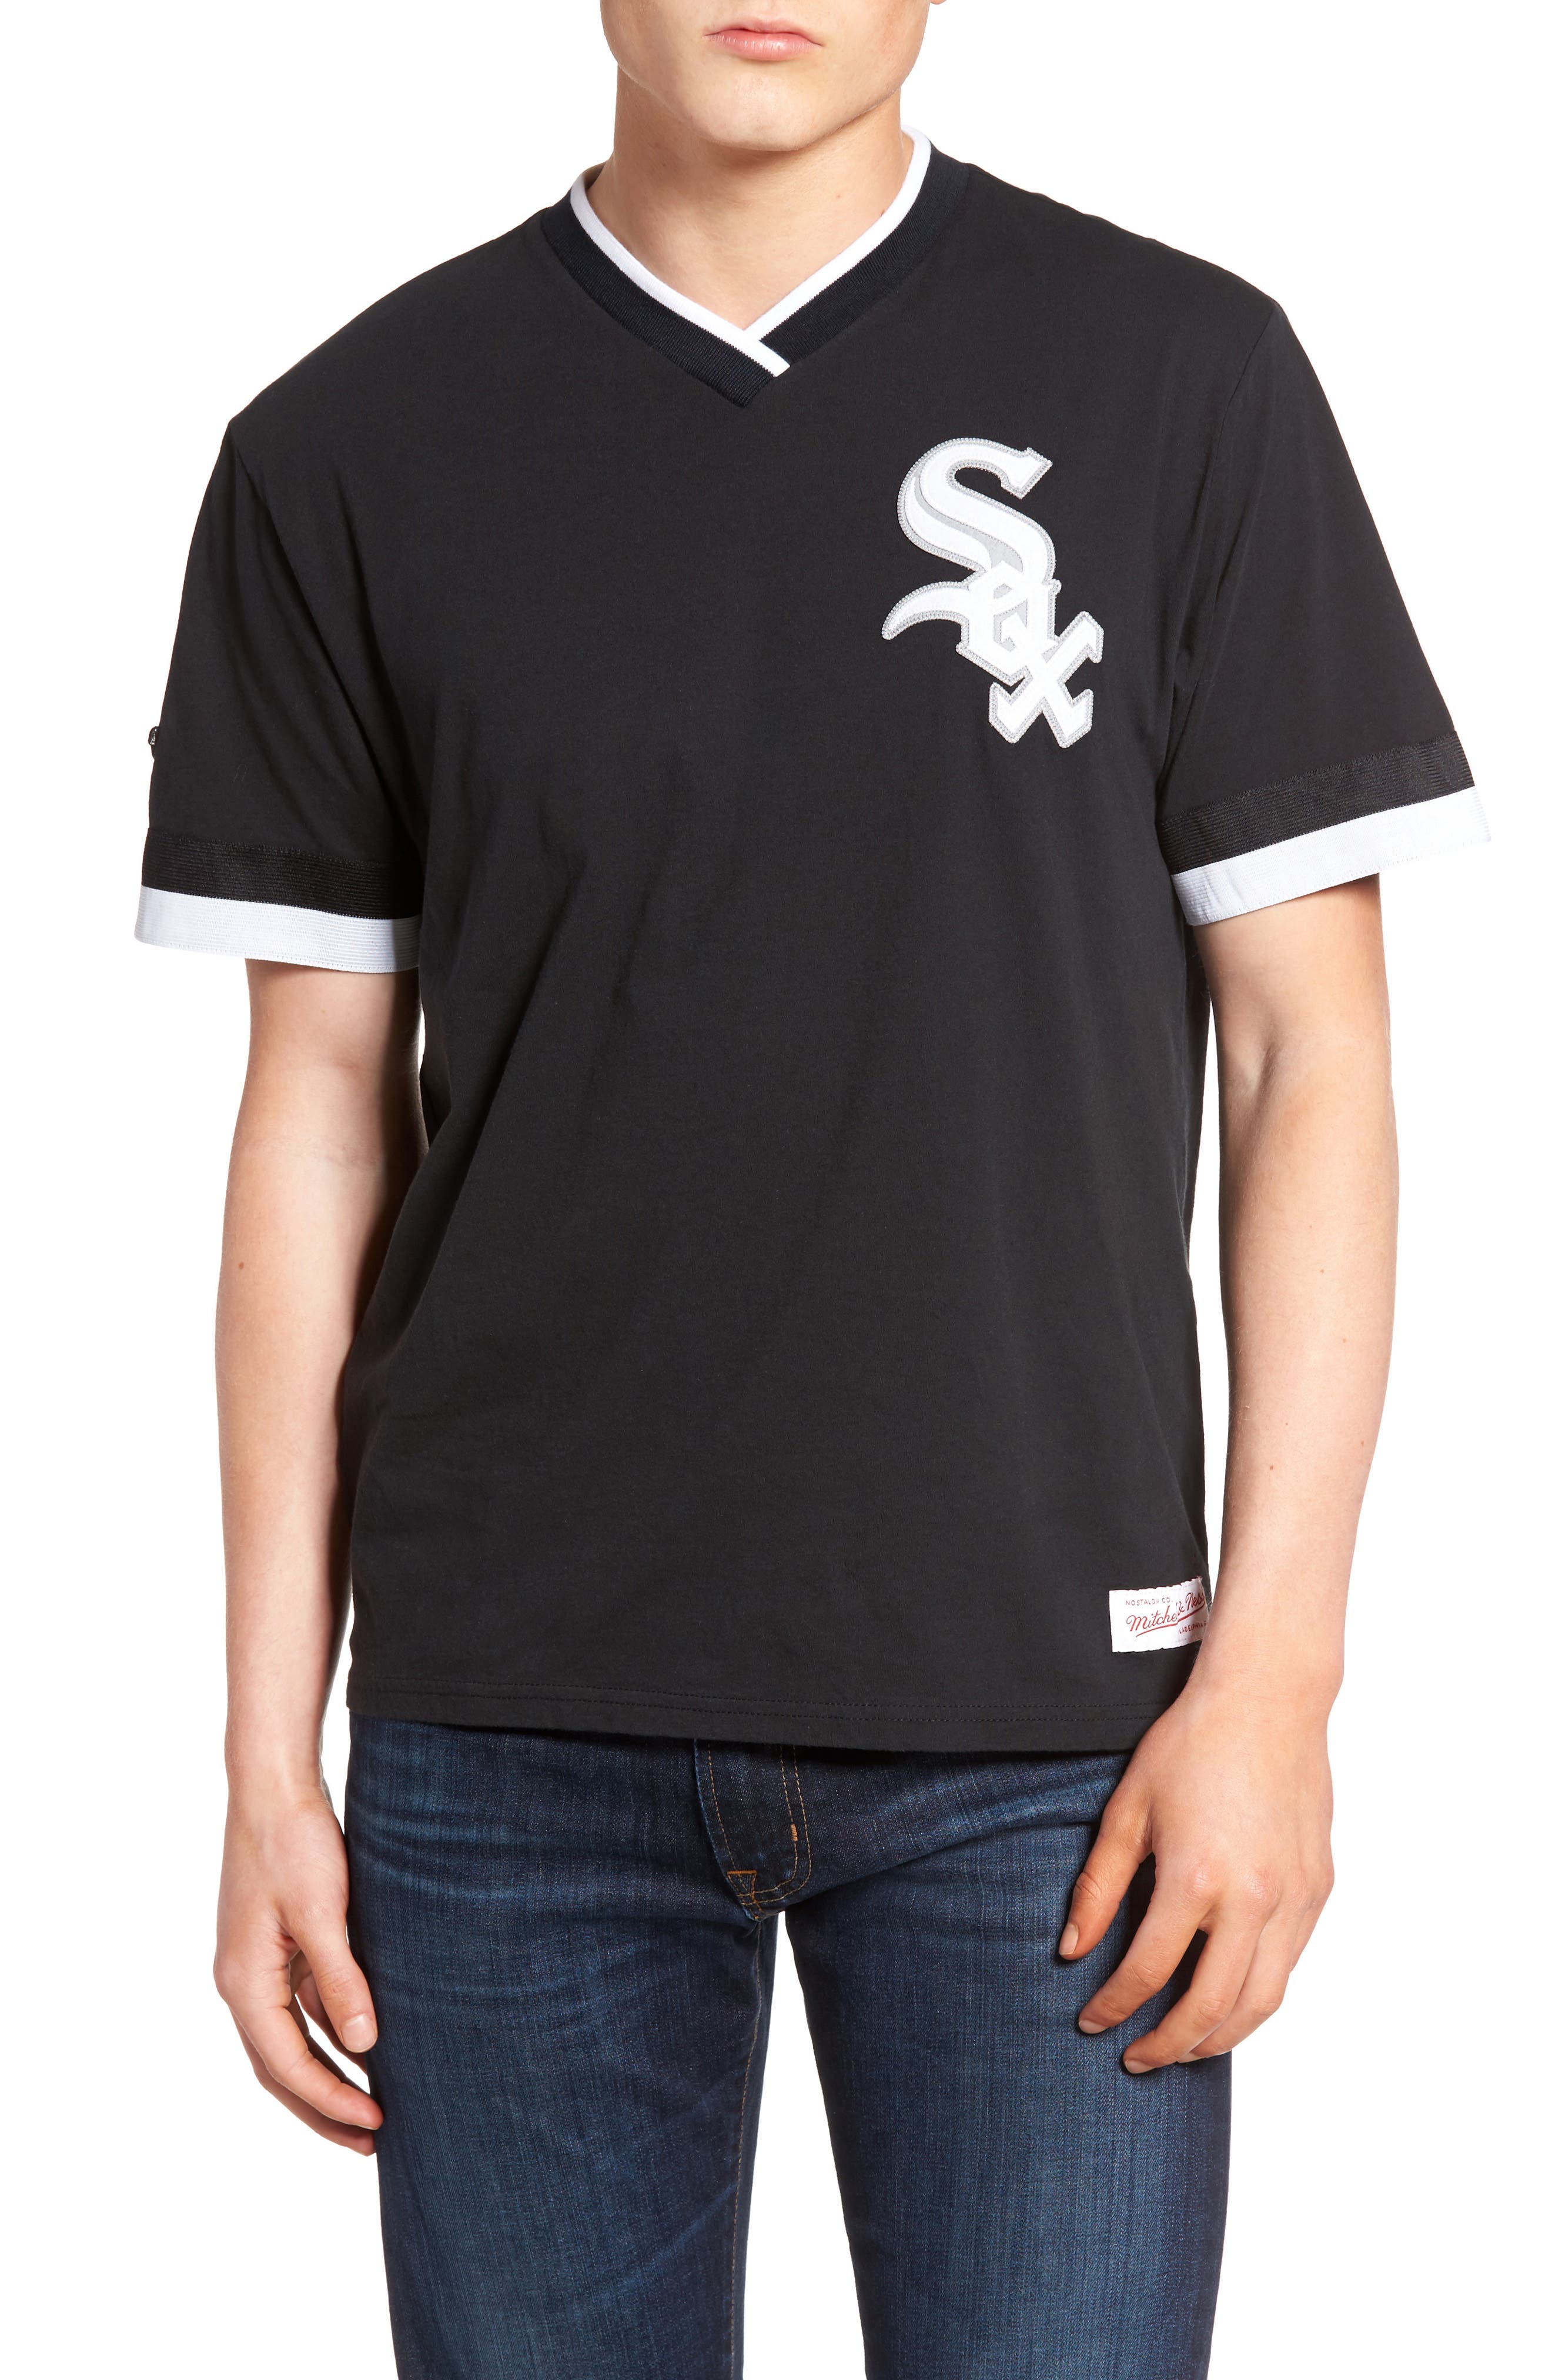 chicago white sox throwback jerseys for sale